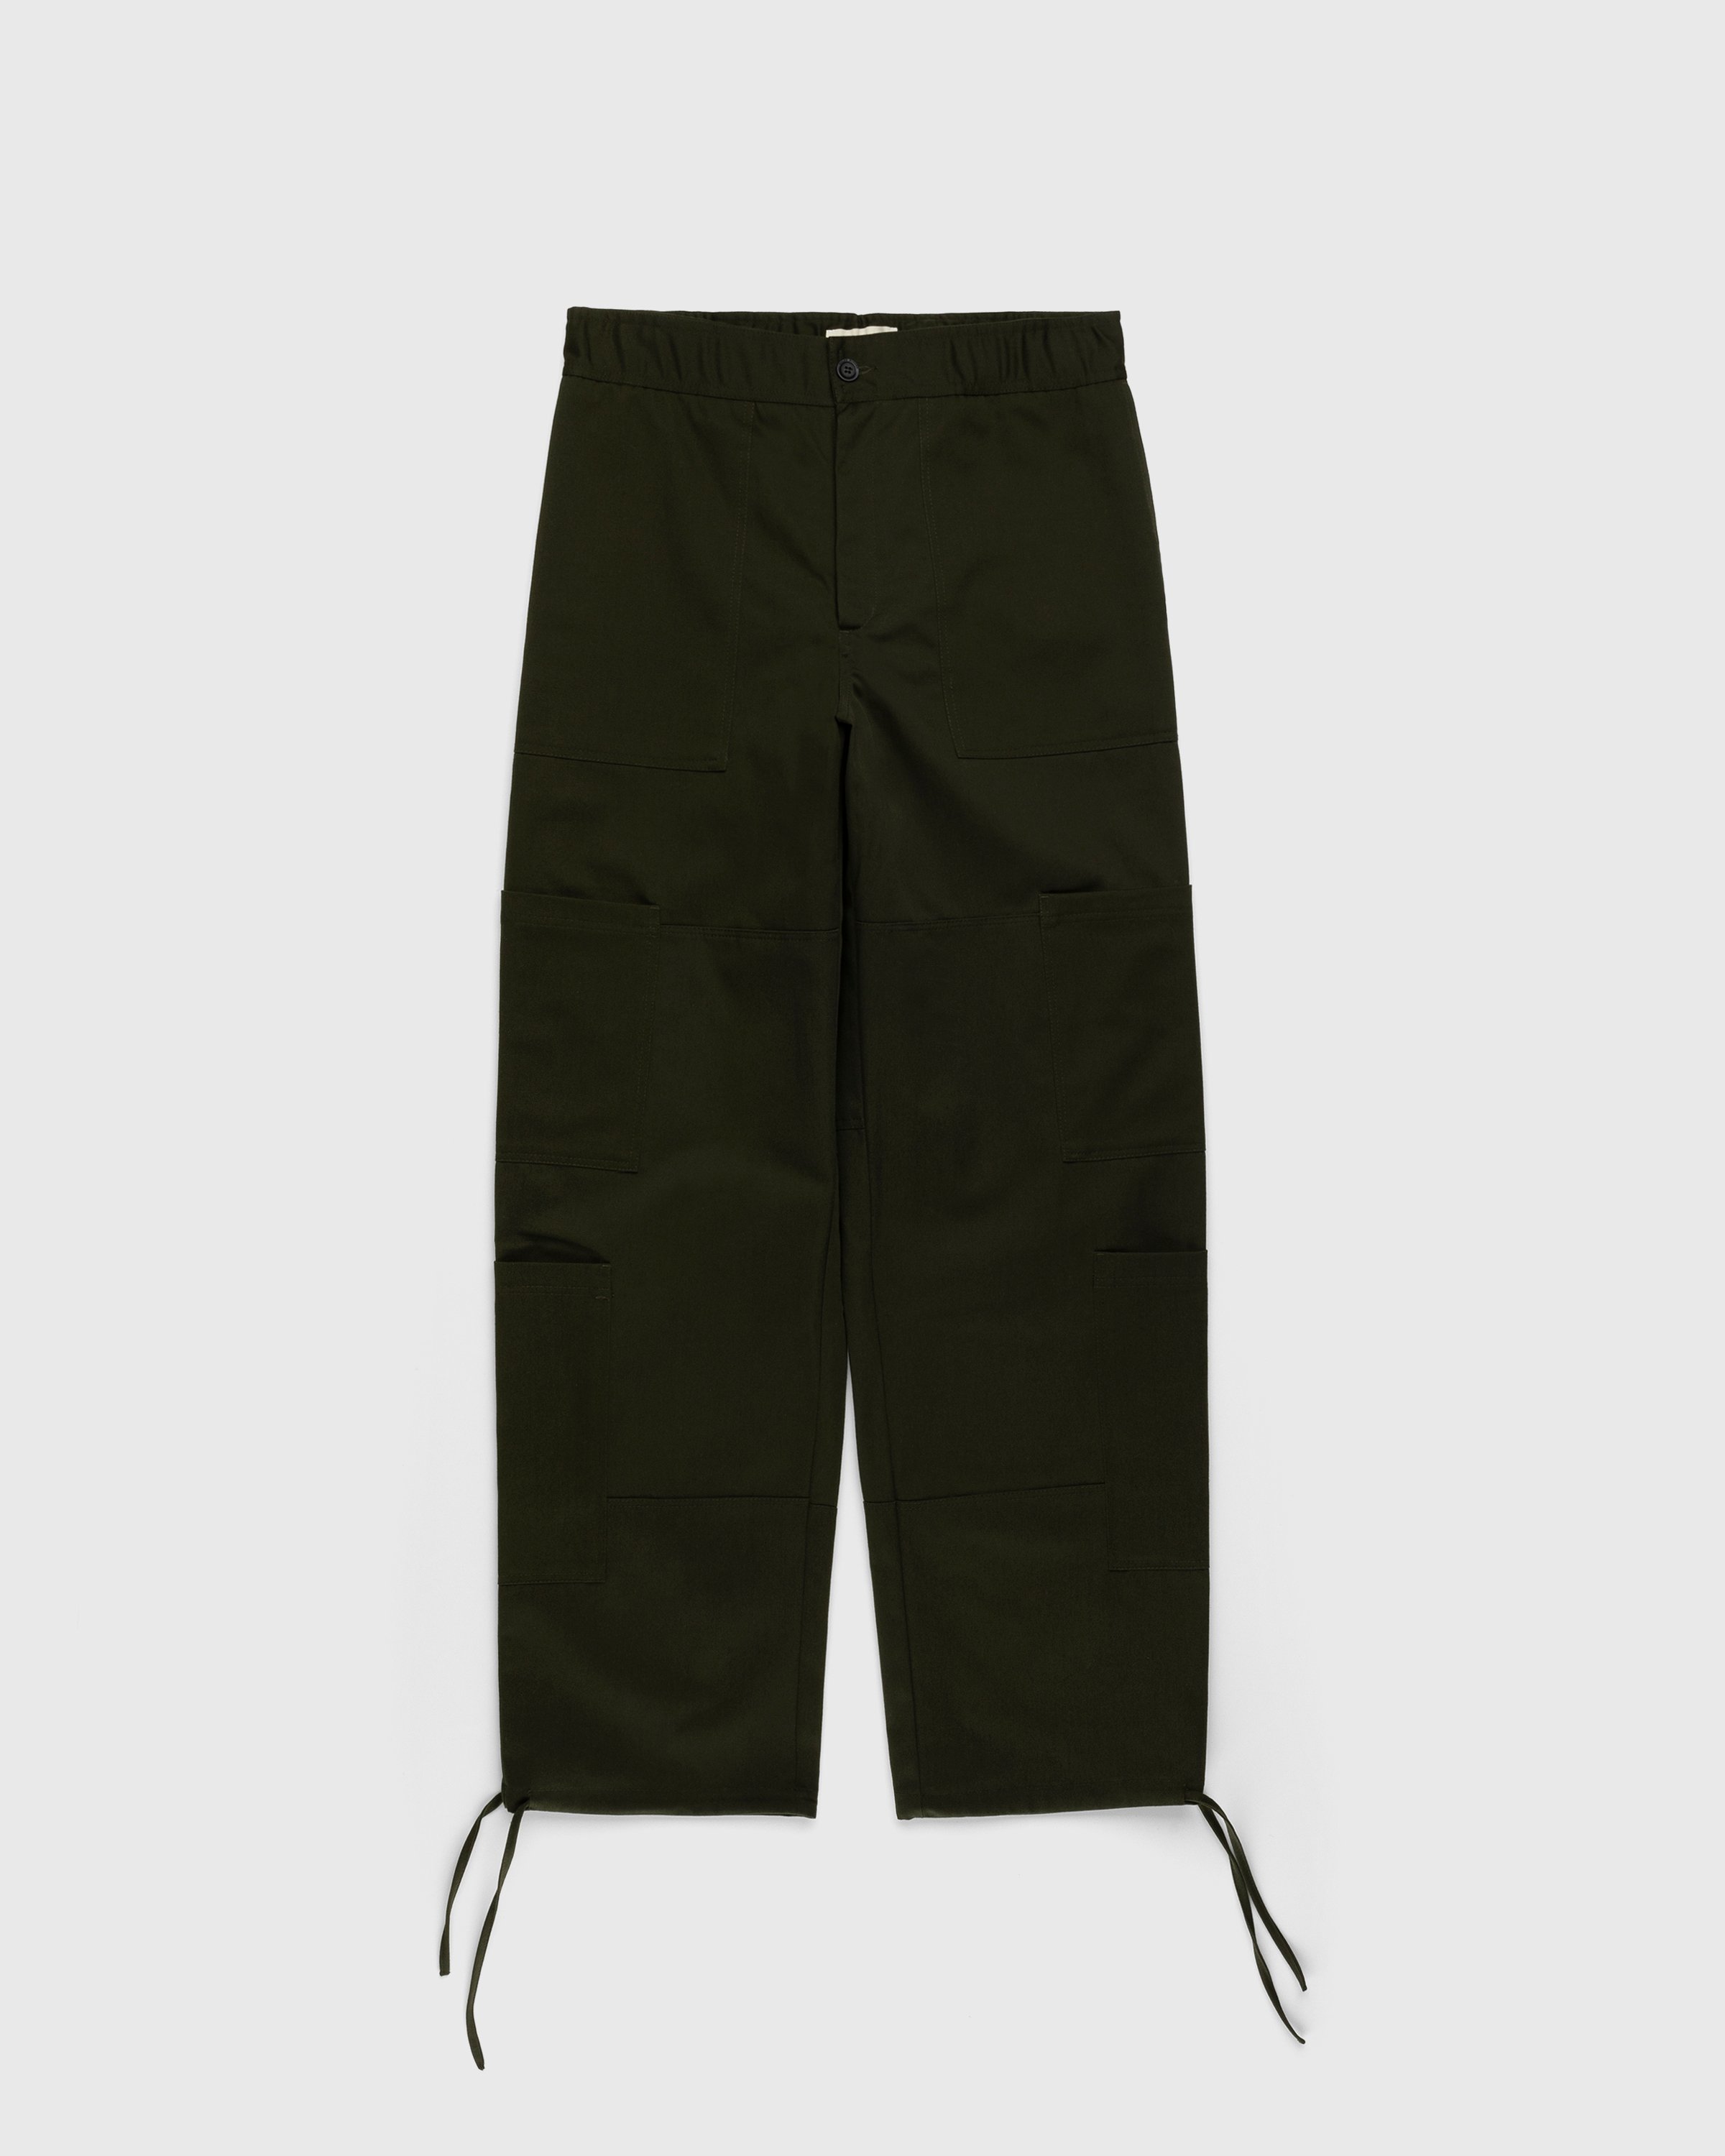 Wales Bonner - Earth Trousers Green - Clothing - Green - Image 1